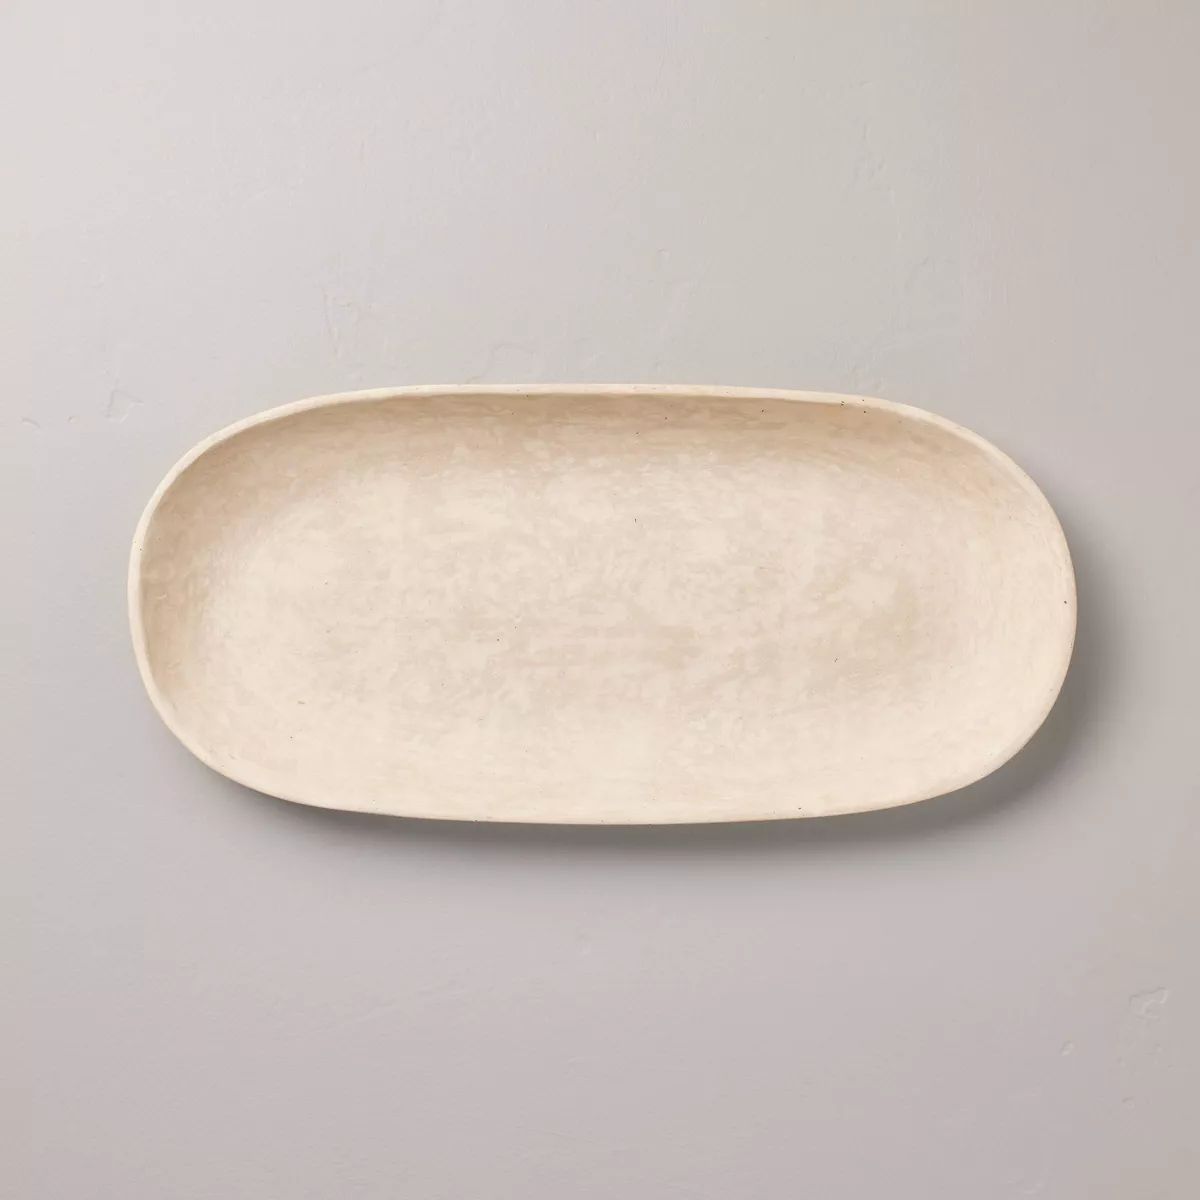 8"x19" Artisan Handcrafted Decorative Oval Tray Cream - Hearth & Hand™ with Magnolia | Target